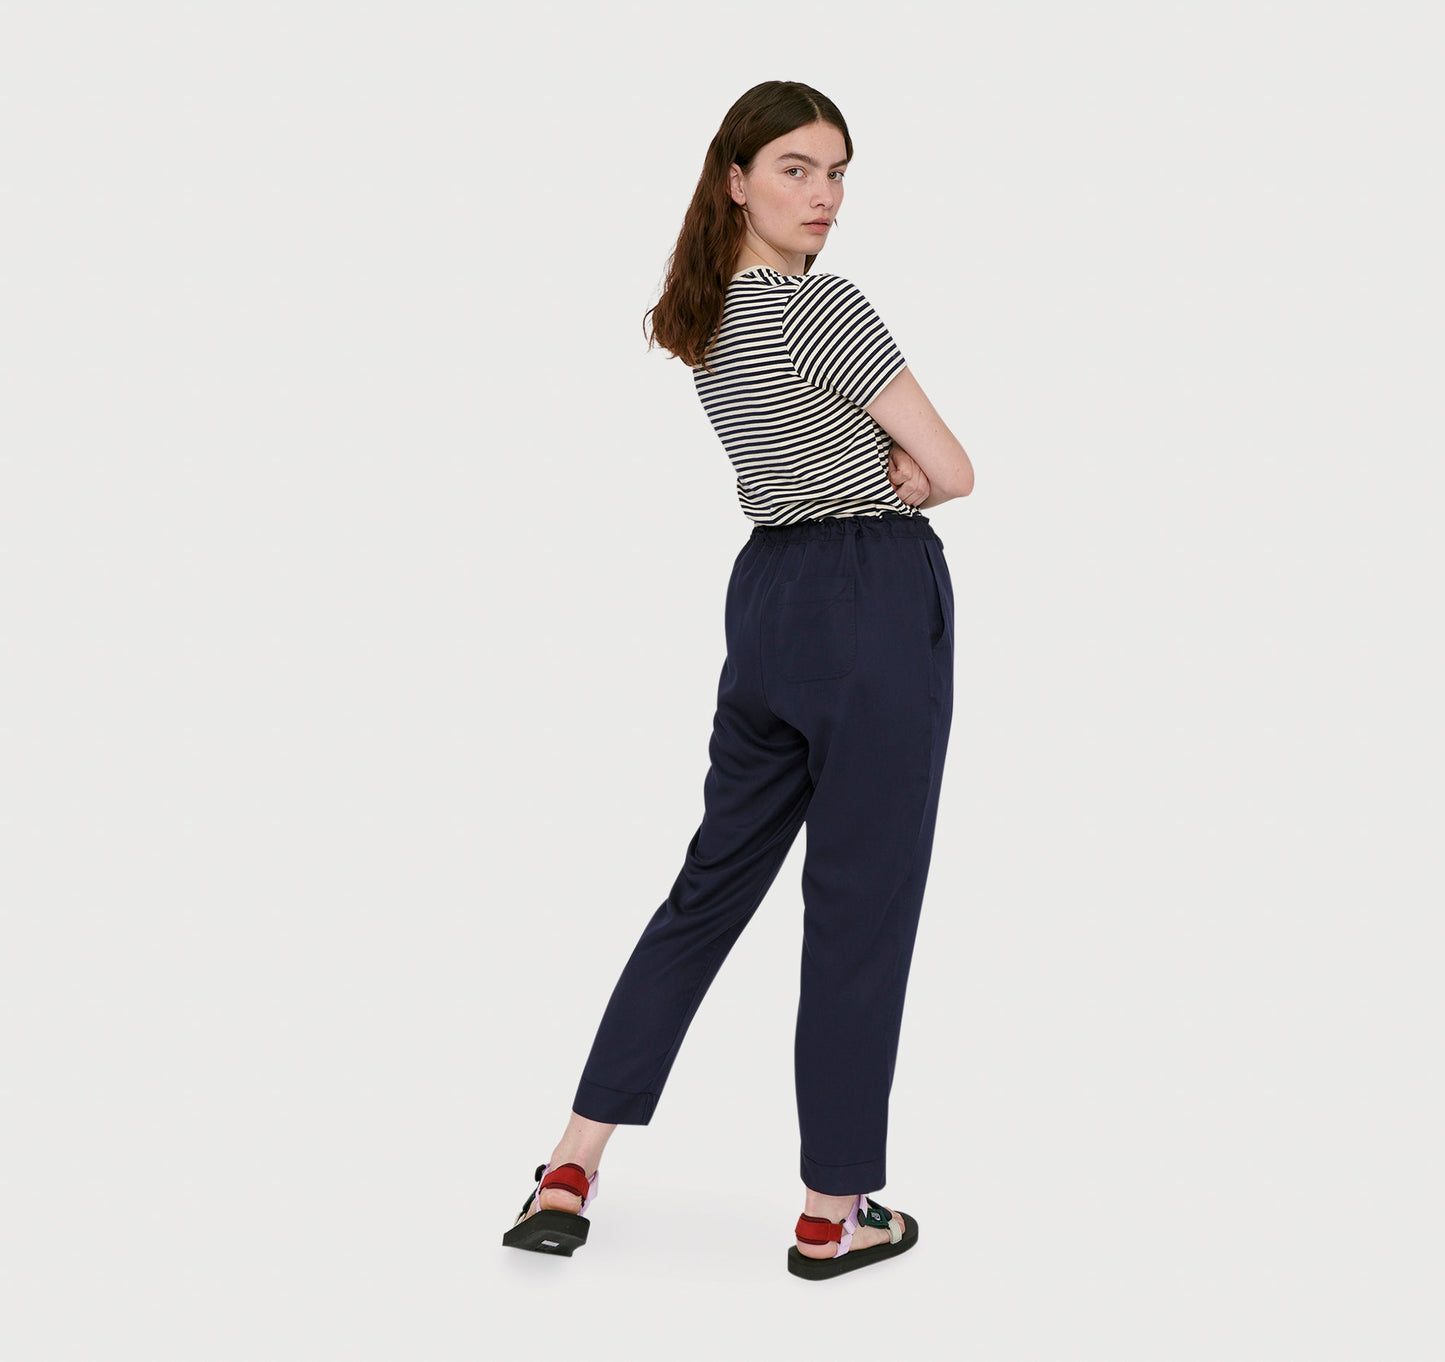 Soft Touch Draw-Cord Pants